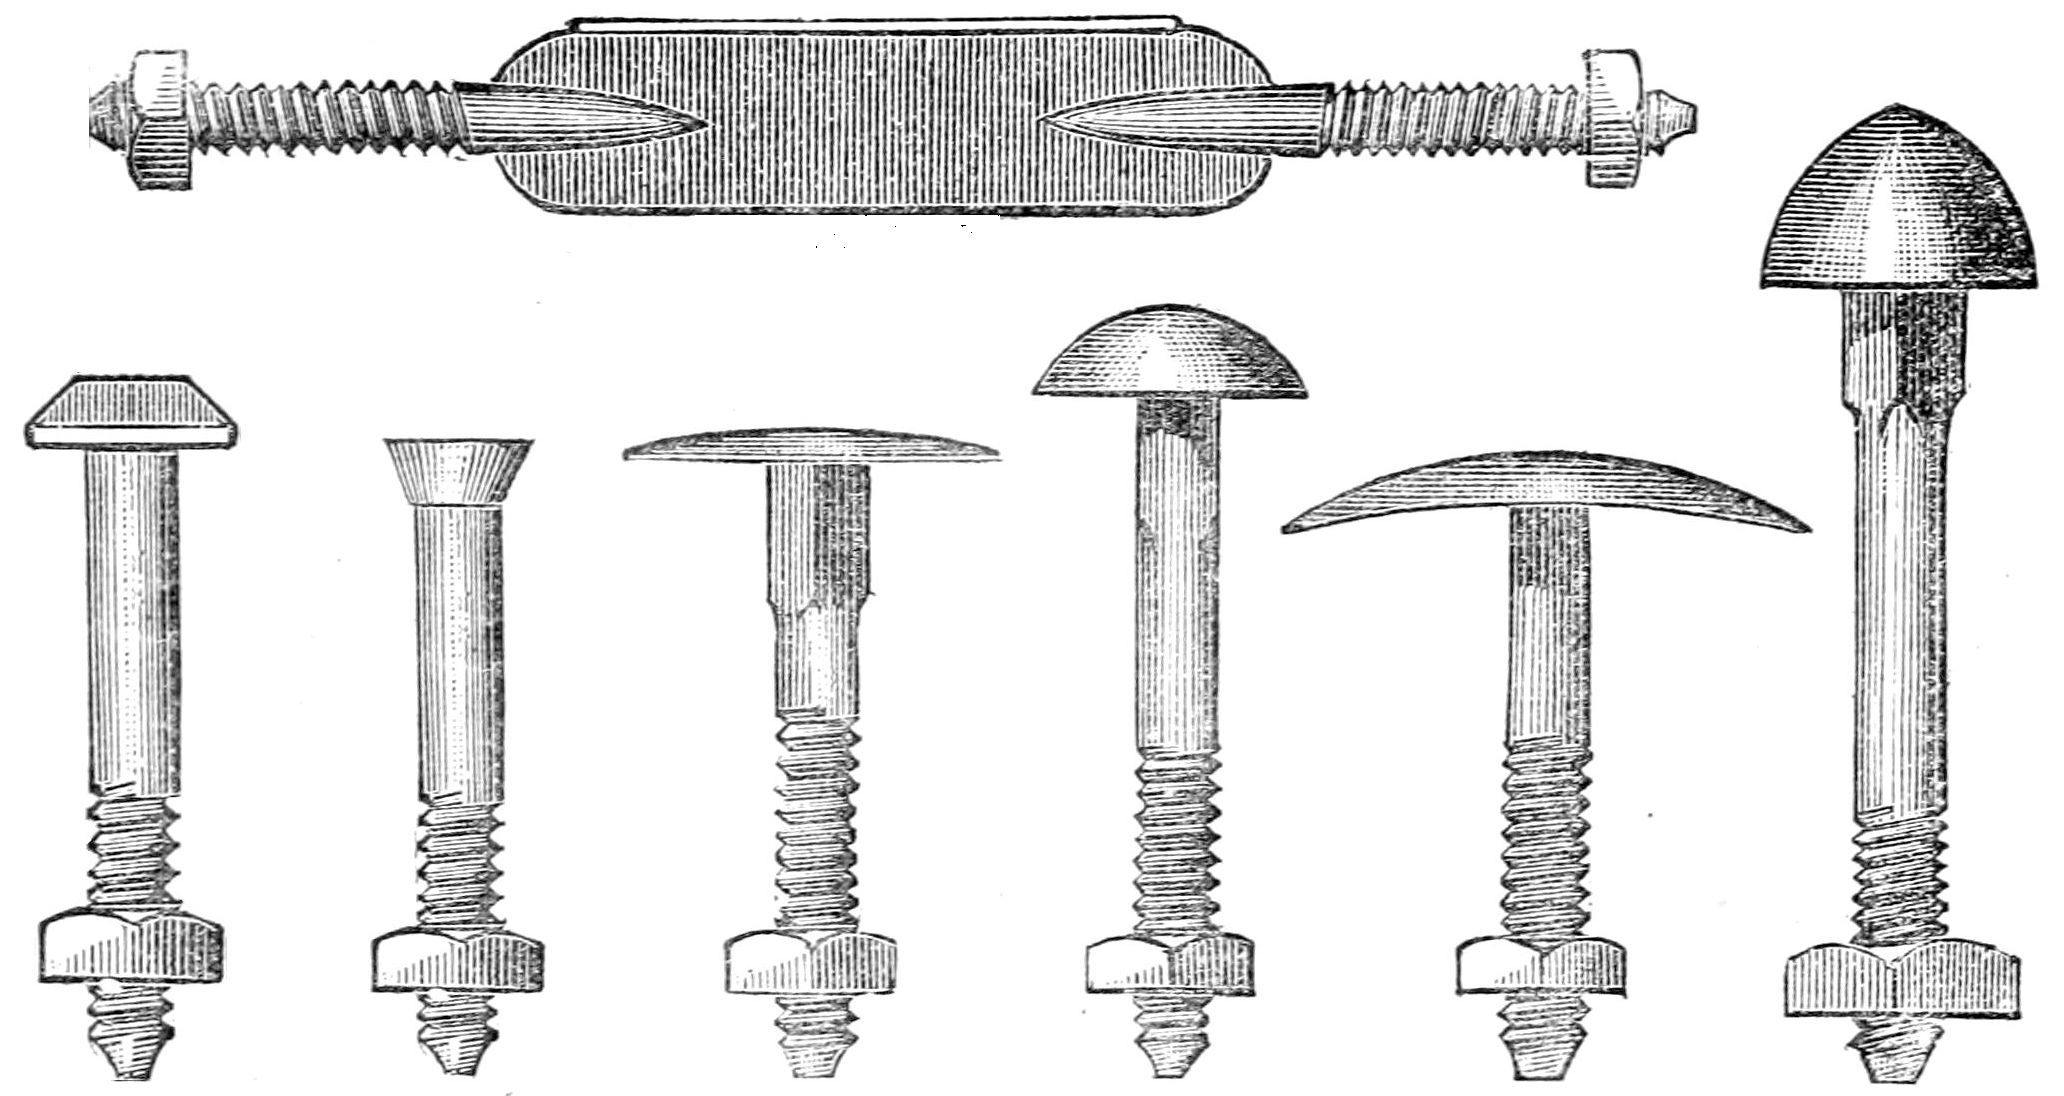 Images of bolt types